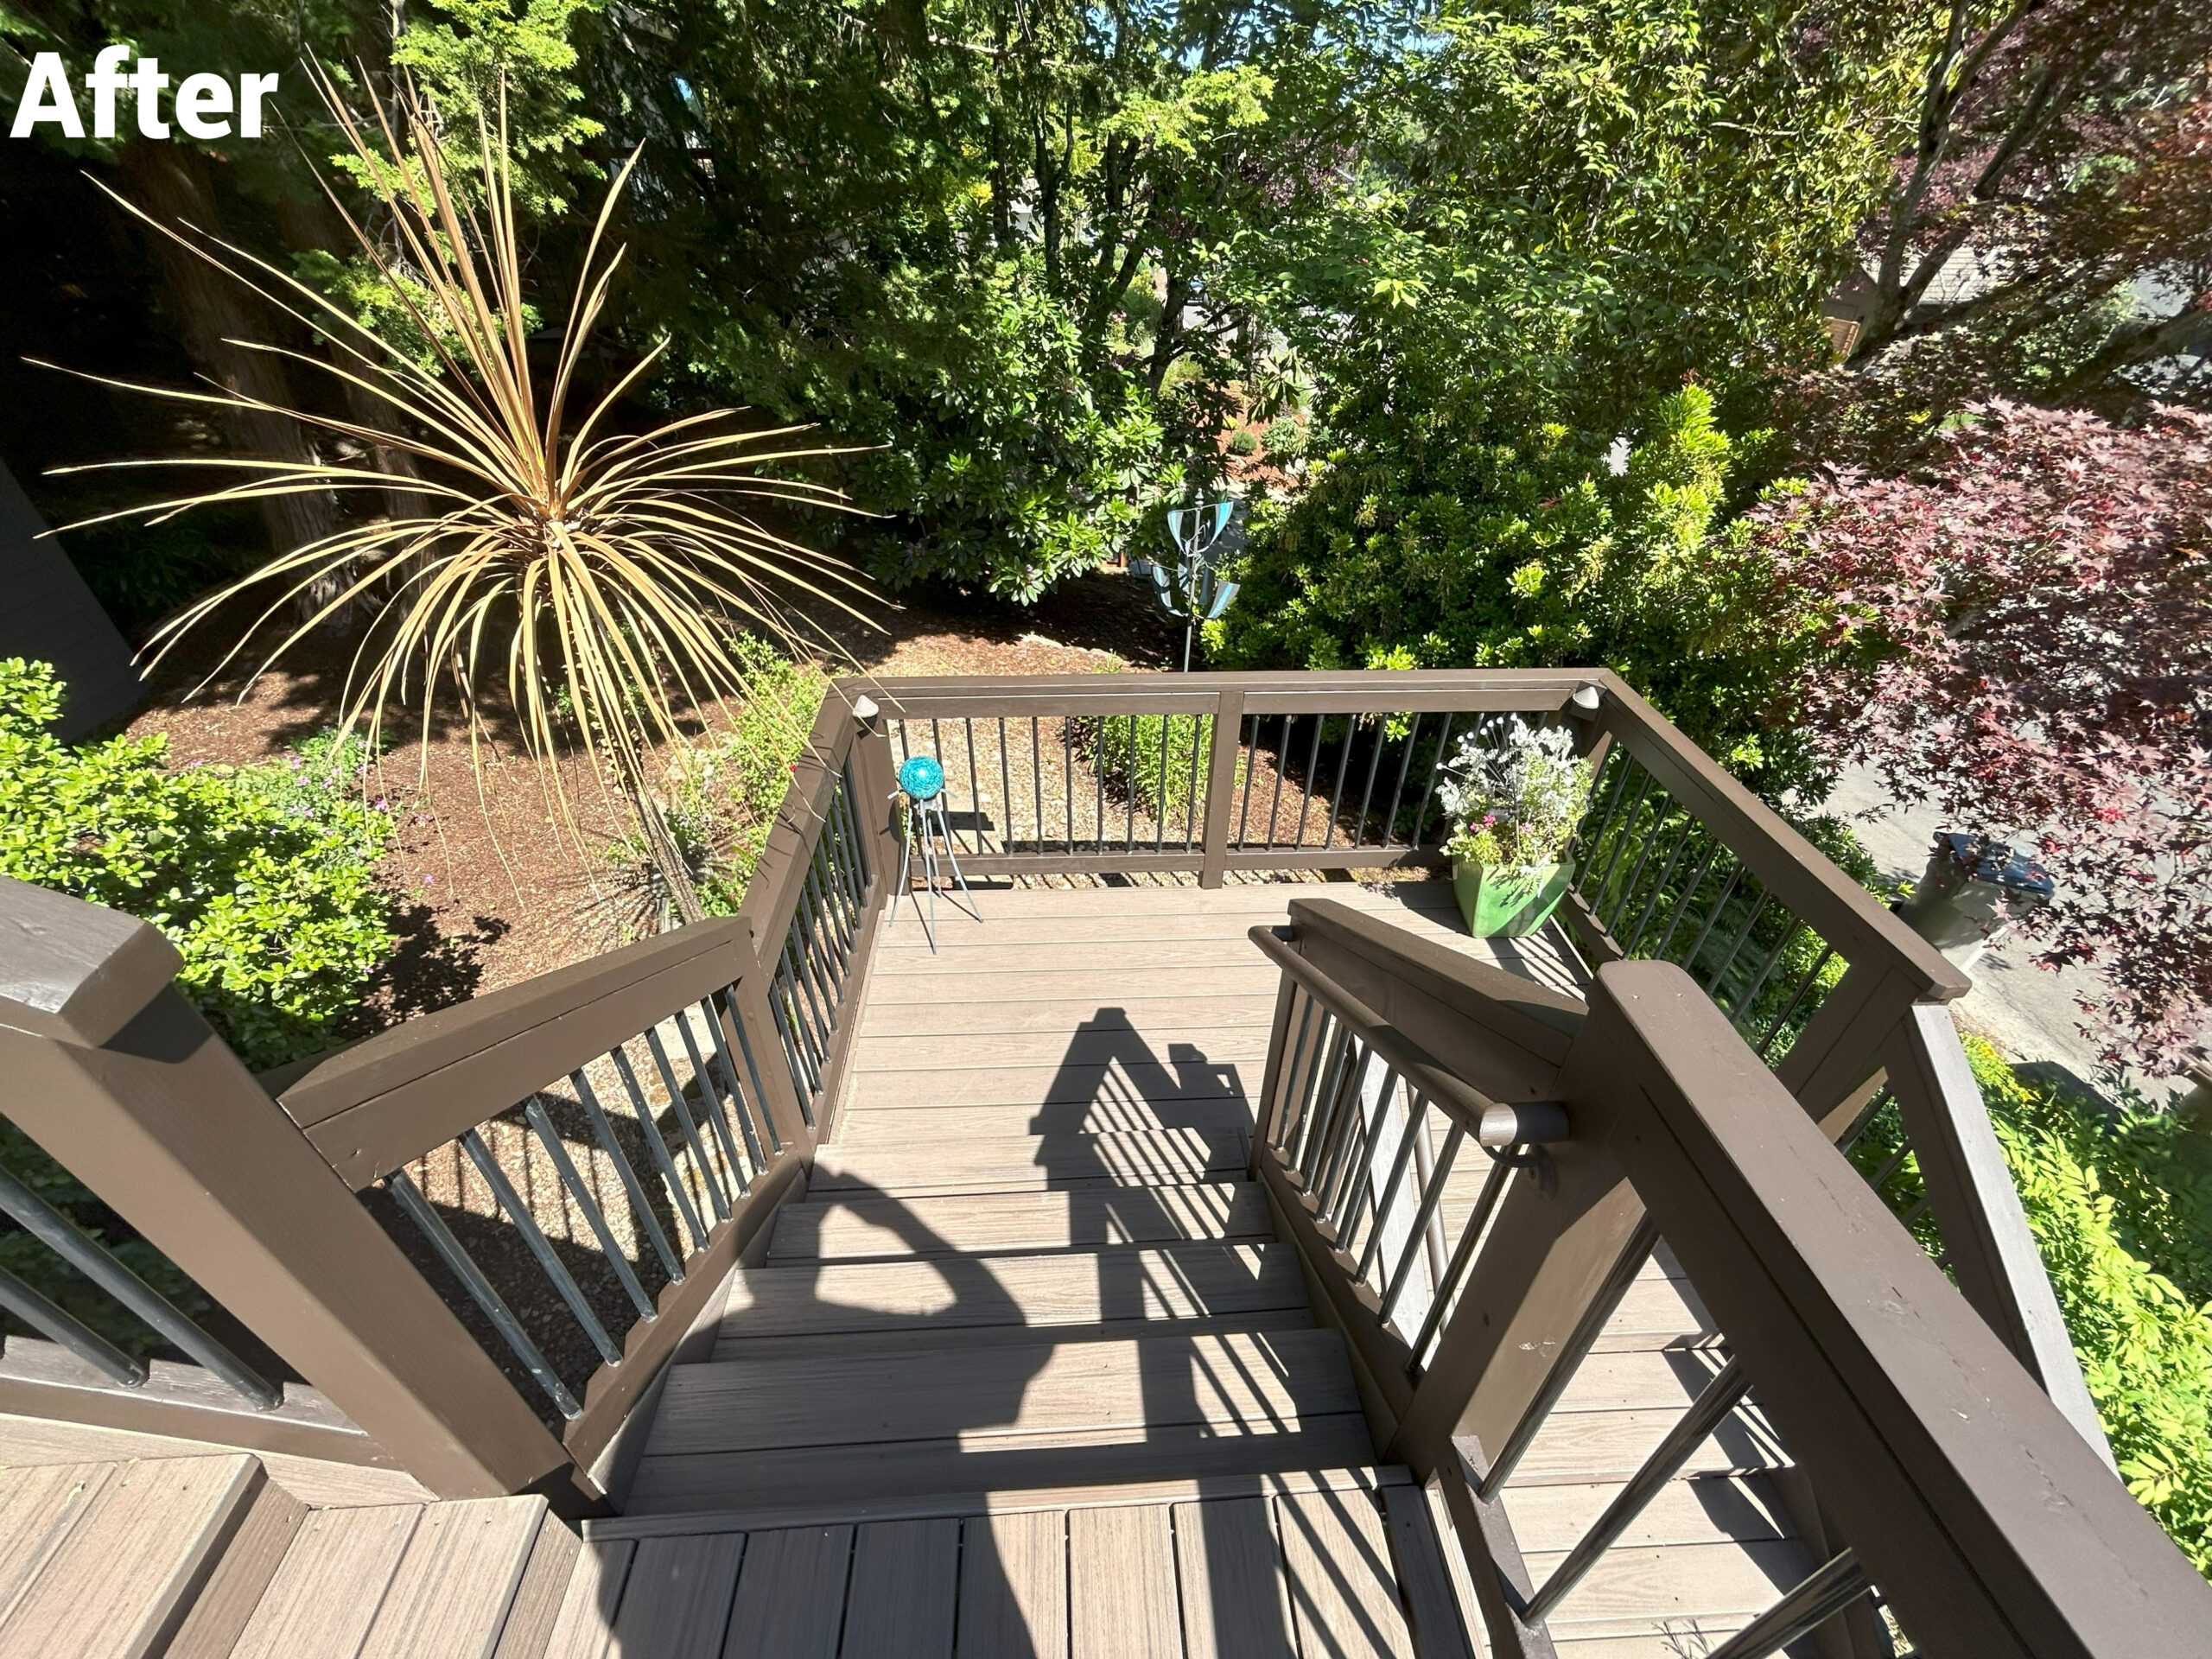 A deck with a well-maintained railing and a tree in the background, ensuring safety concerns are addressed.